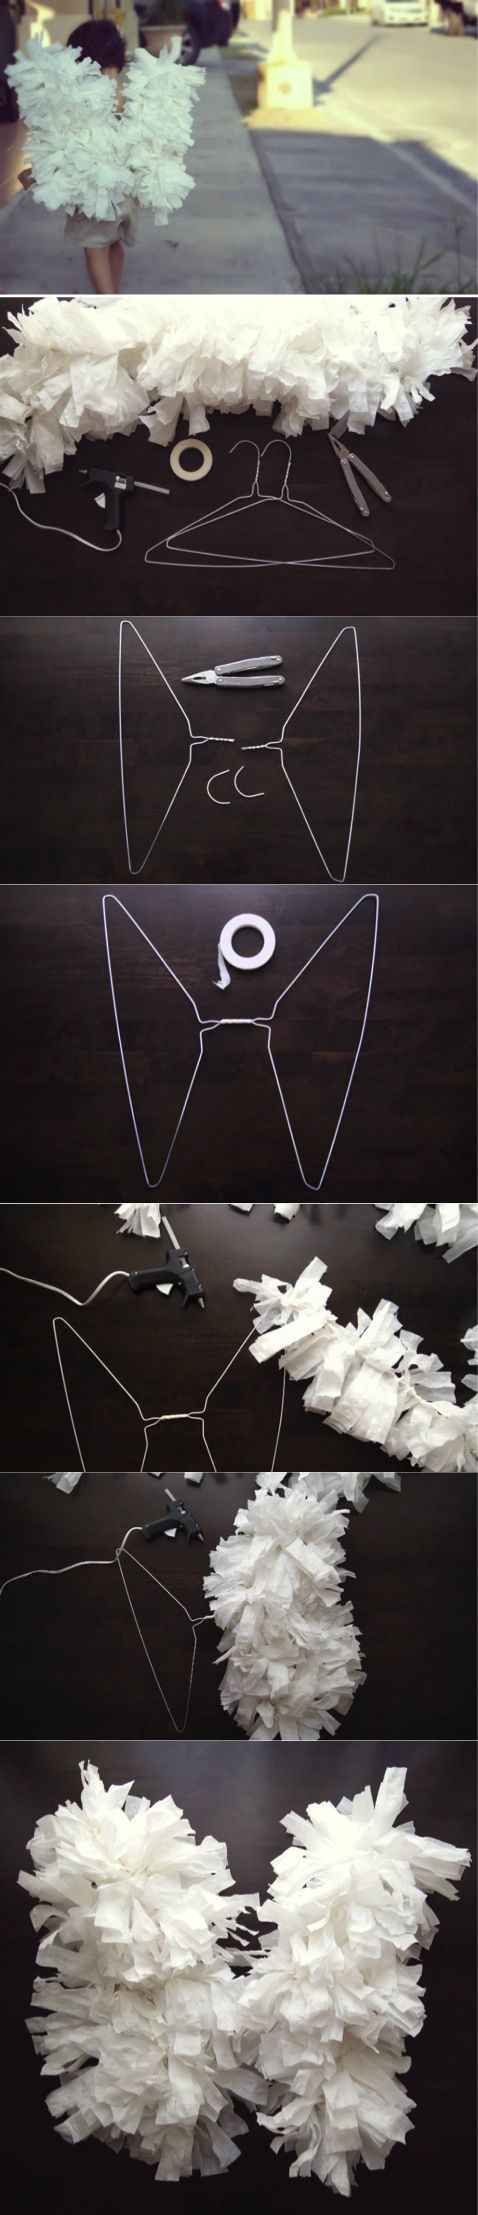 DIY Angel Wings Using Paper and Clothes Hangers. 